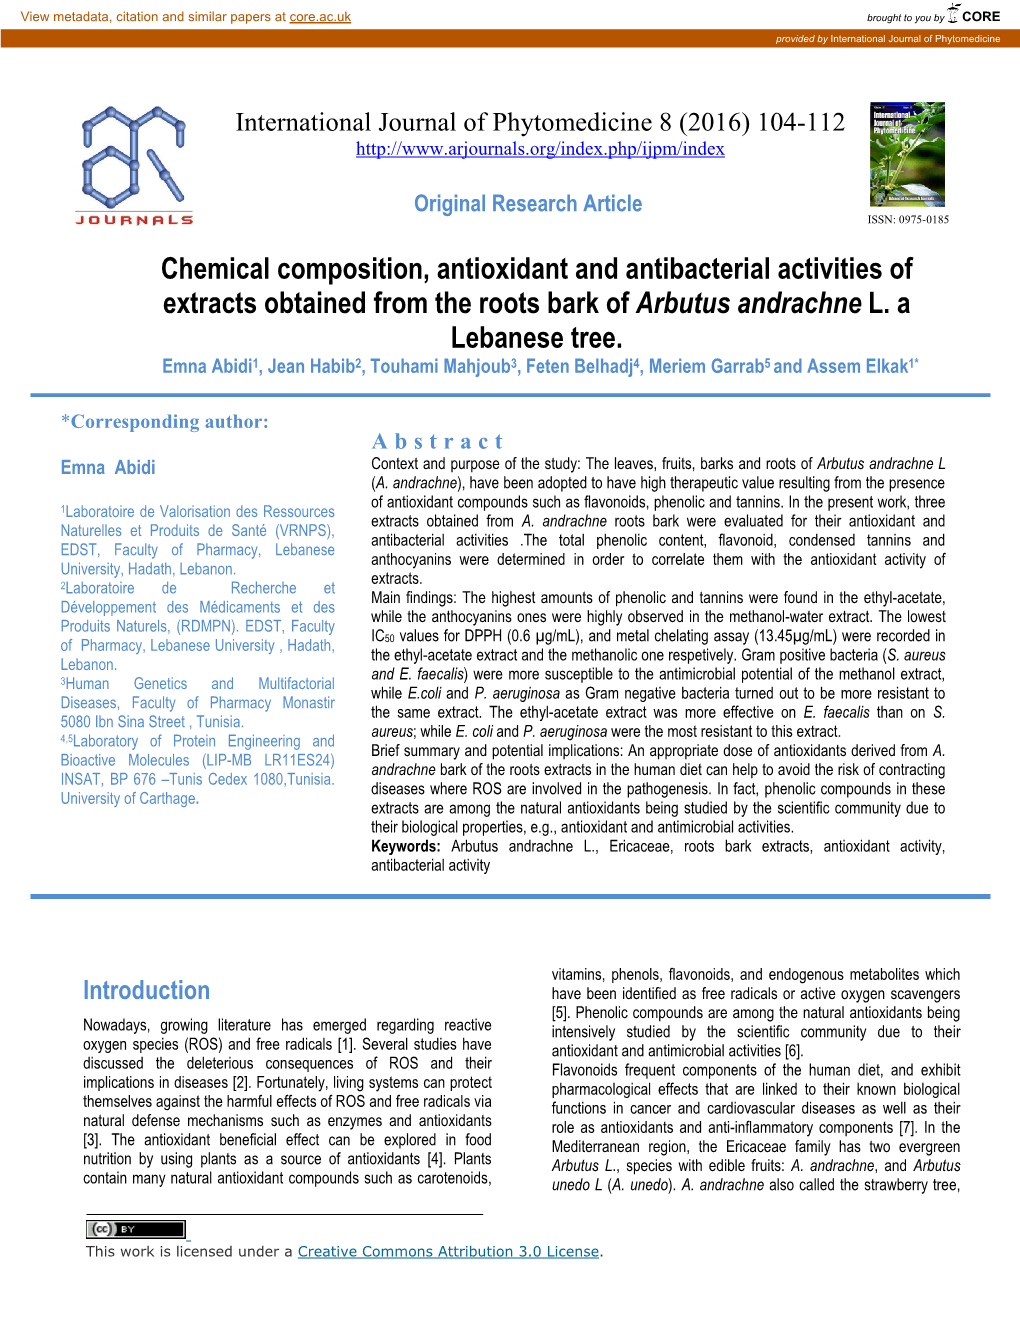 Chemical Composition, Antioxidant and Antibacterial Activities of Extracts Obtained from the Roots Bark of Arbutus Andrachne L. a Lebanese Tree